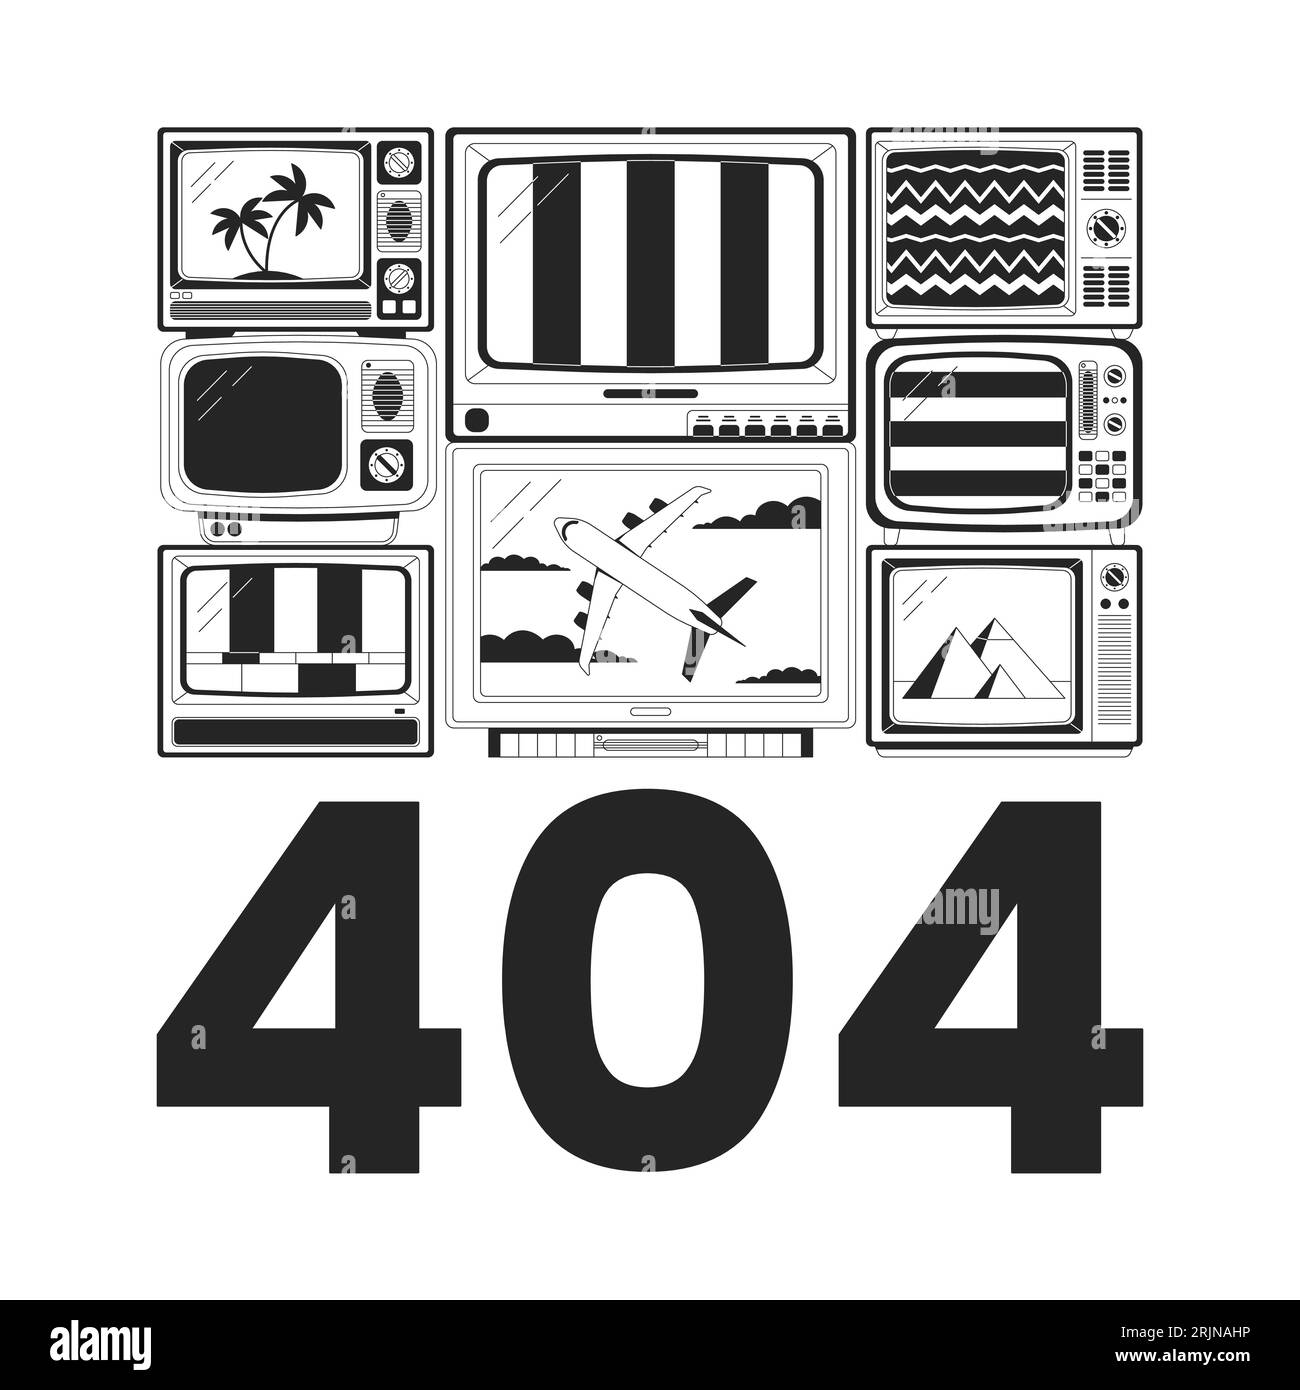 Tv without signals black white error 404 flash message Stock Vector